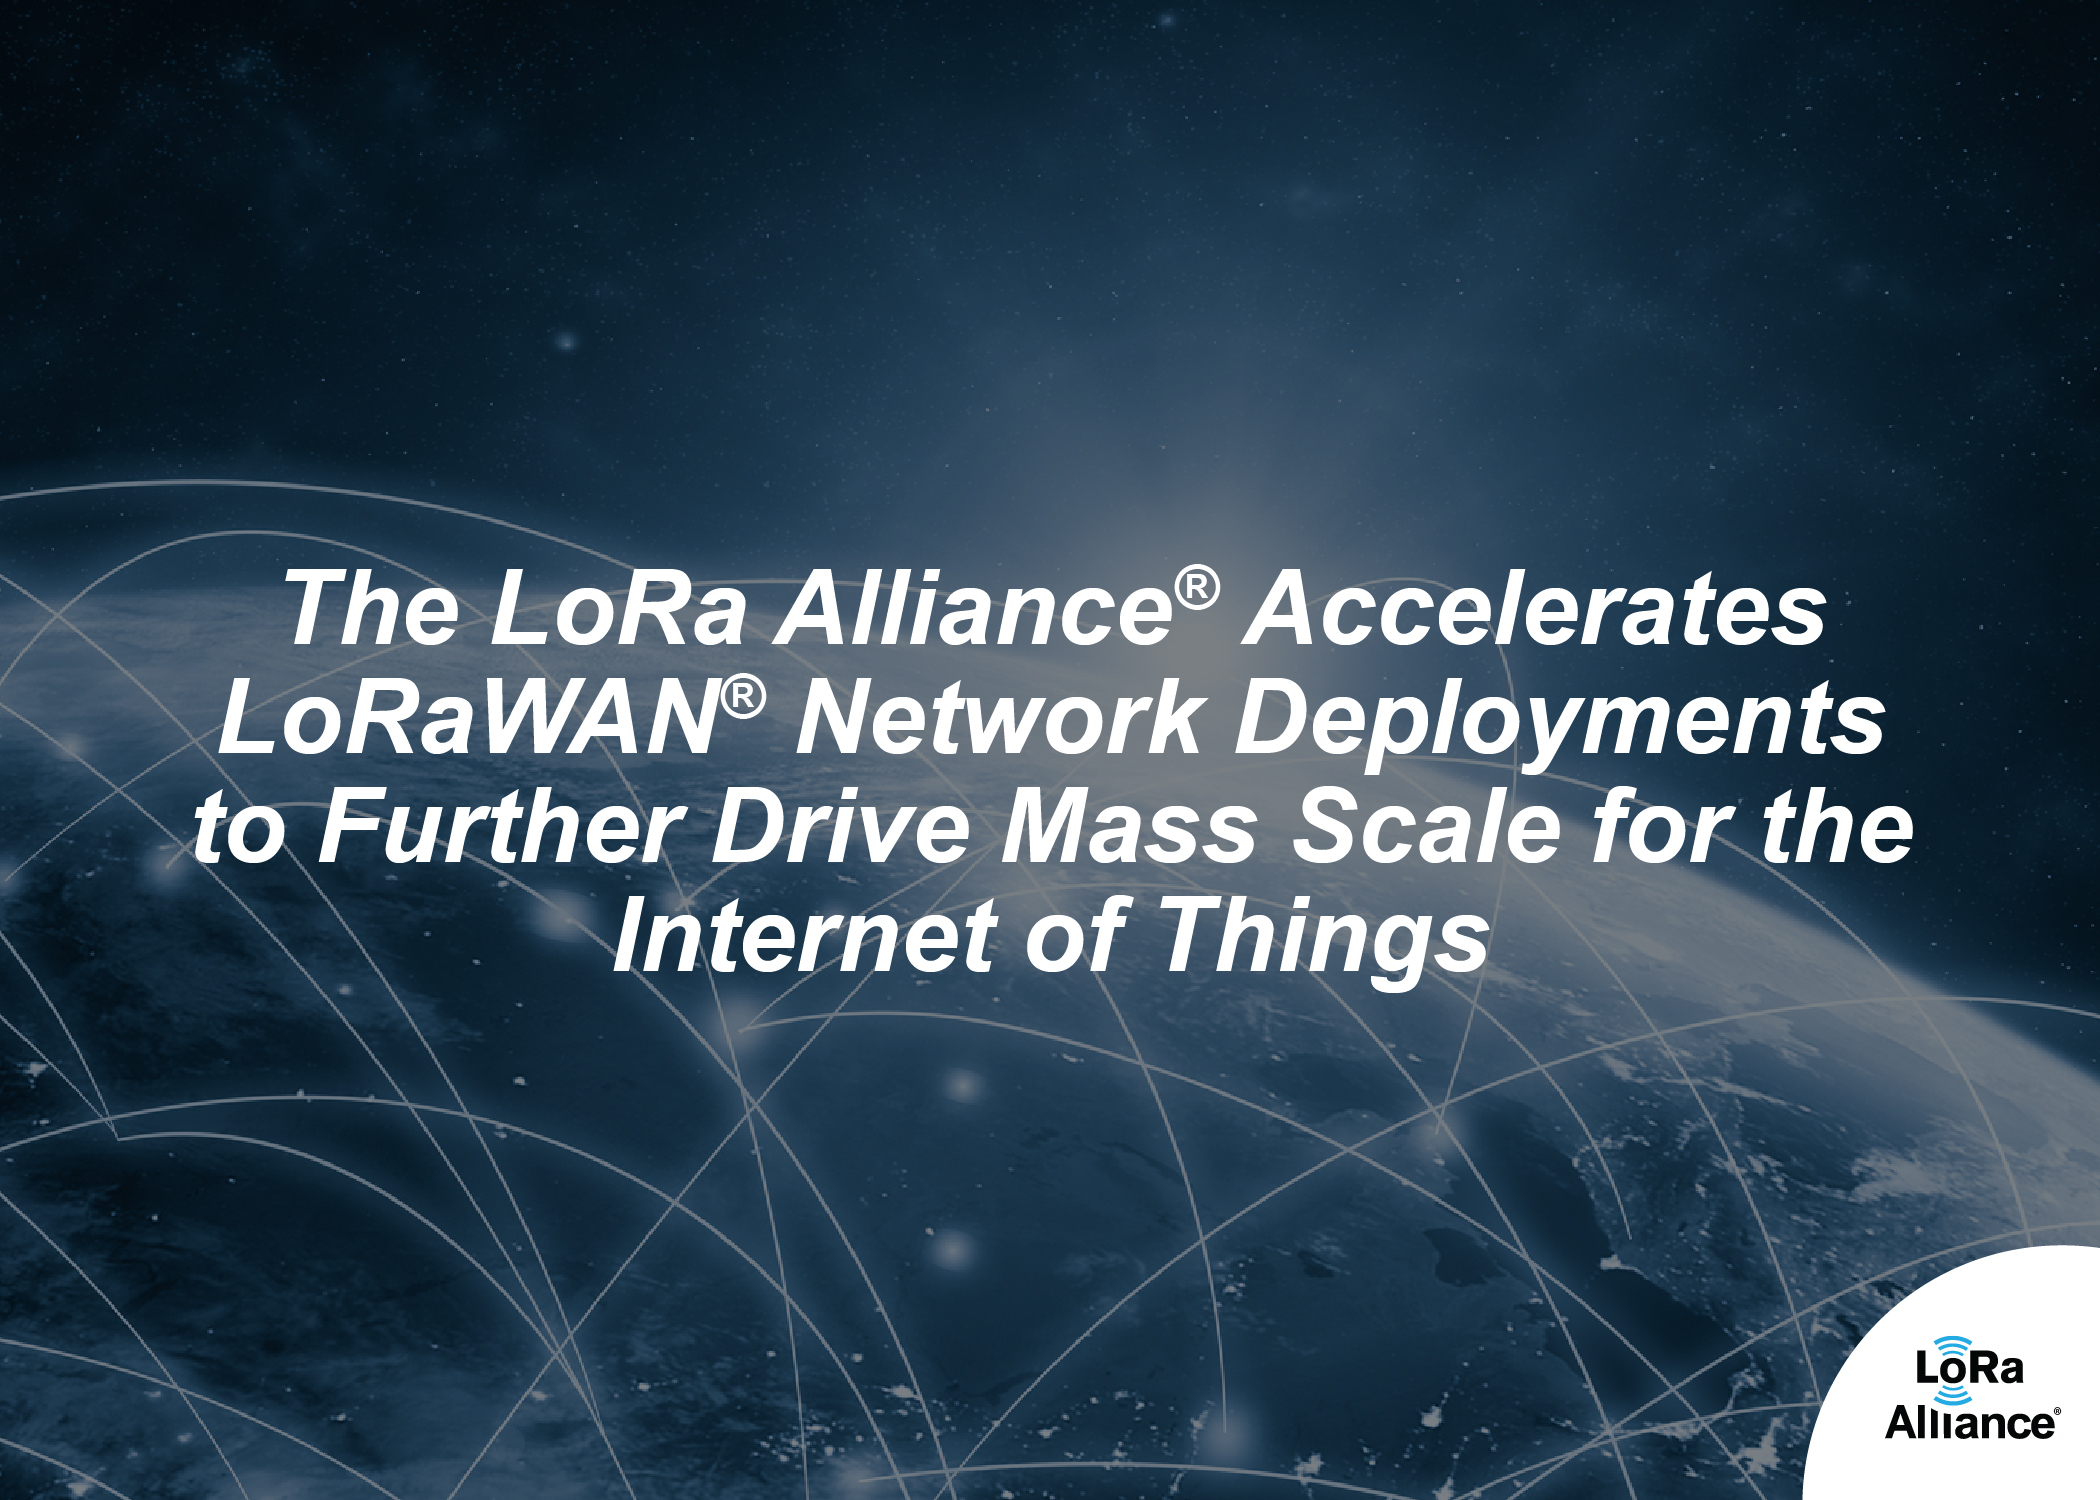 LoRaWAN Gateway Test and Measurement Guidelines and White Paper on Radio Coexistence